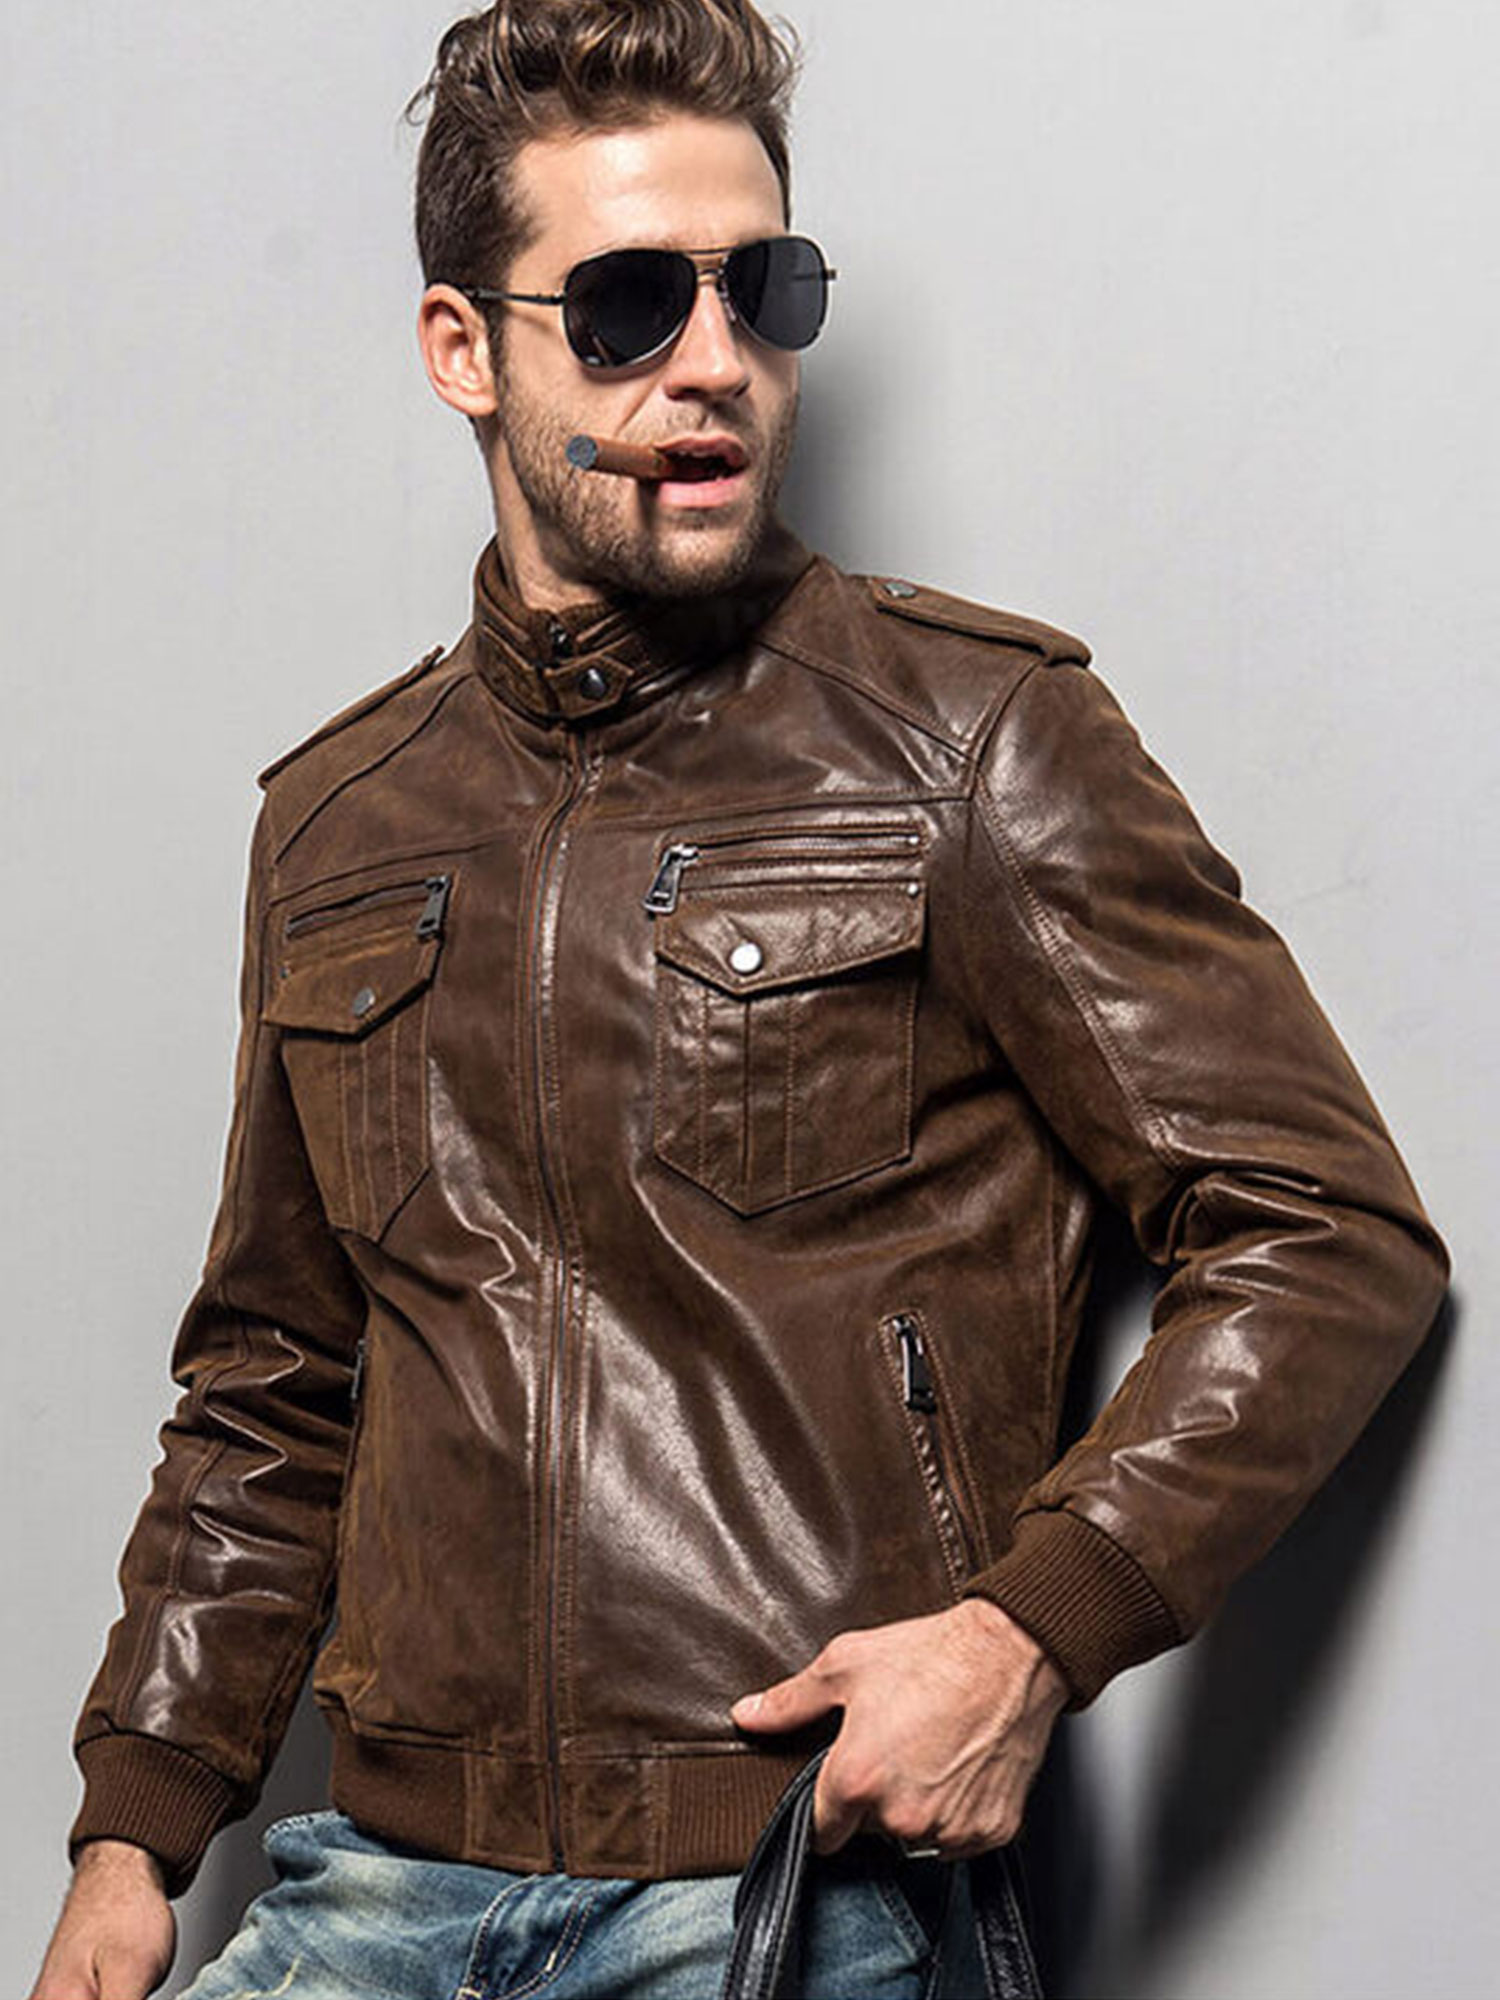 mens-brown-bomber-leather-jacket-save-up-to-50-off (5)